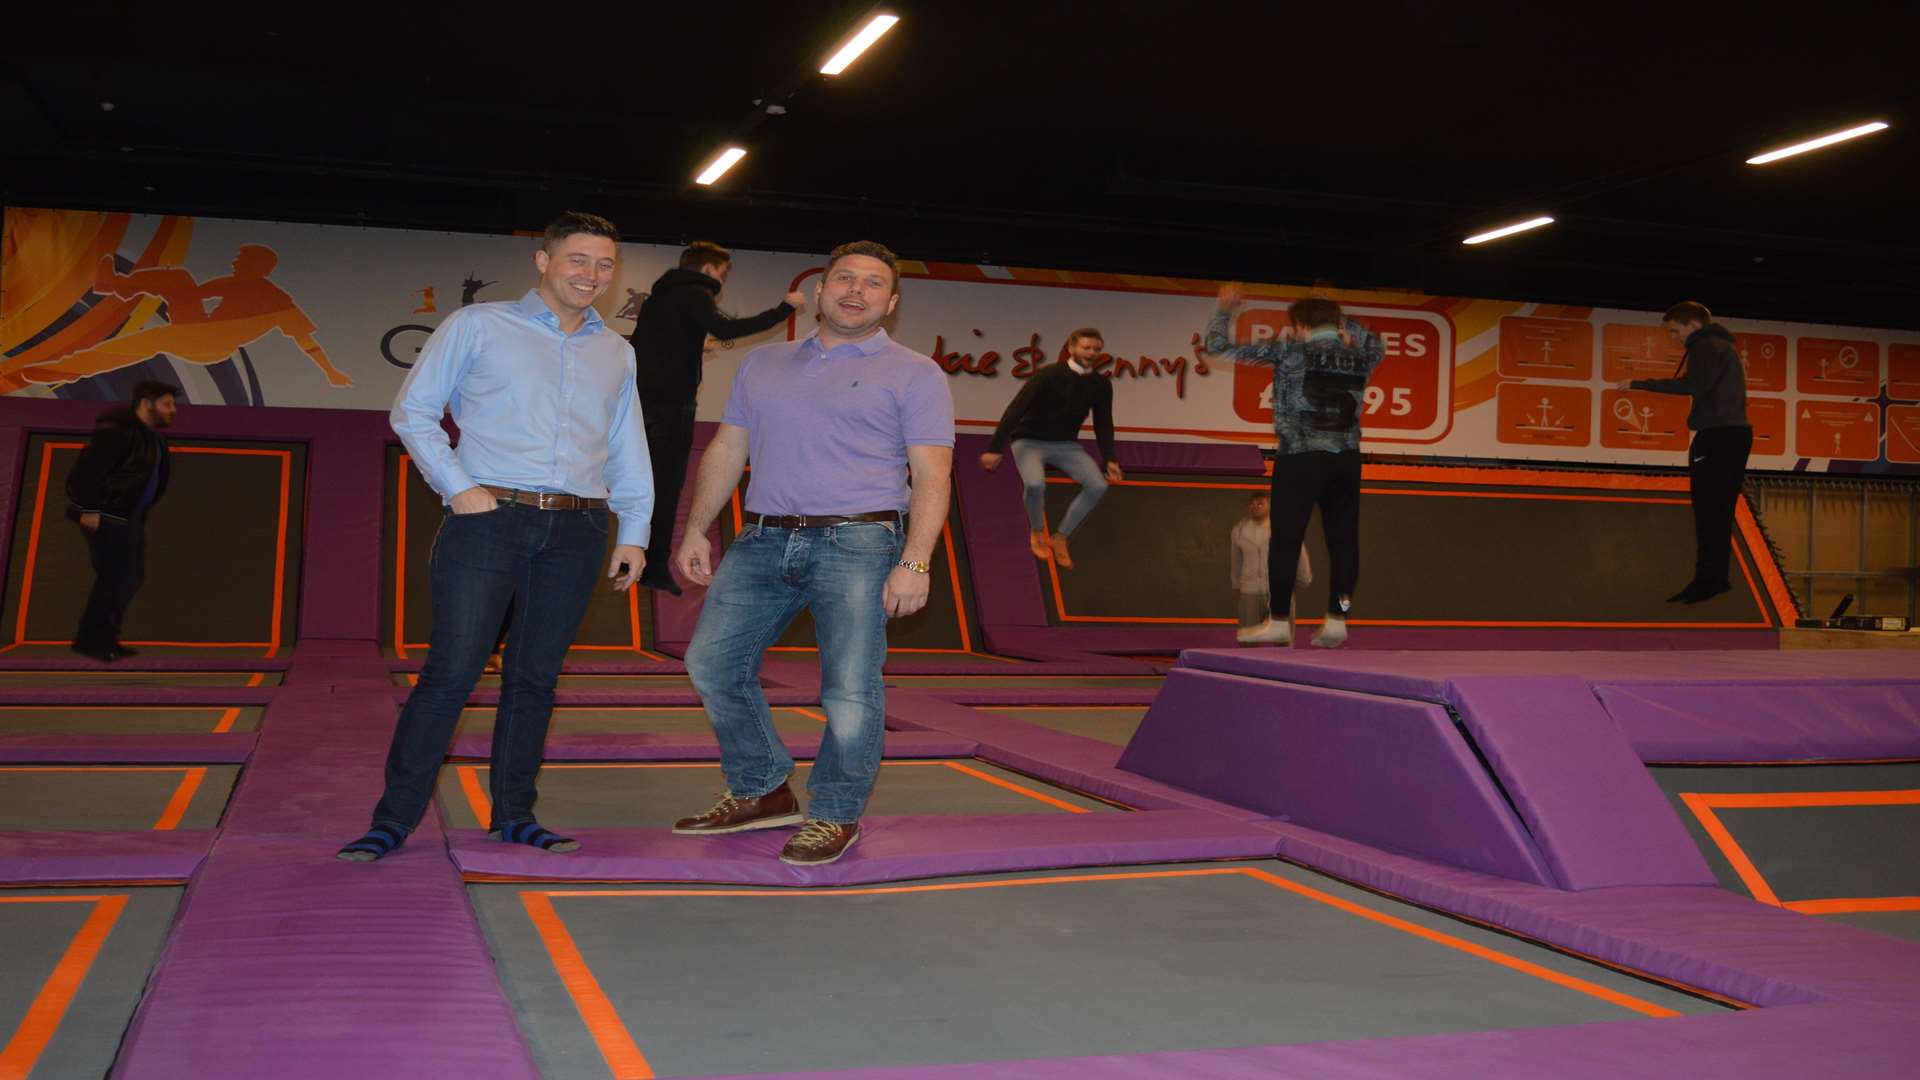 Harvey Jenkinson and Michael Harrison, directors of Gravity Trampoline Parks, at the Maidstone venue